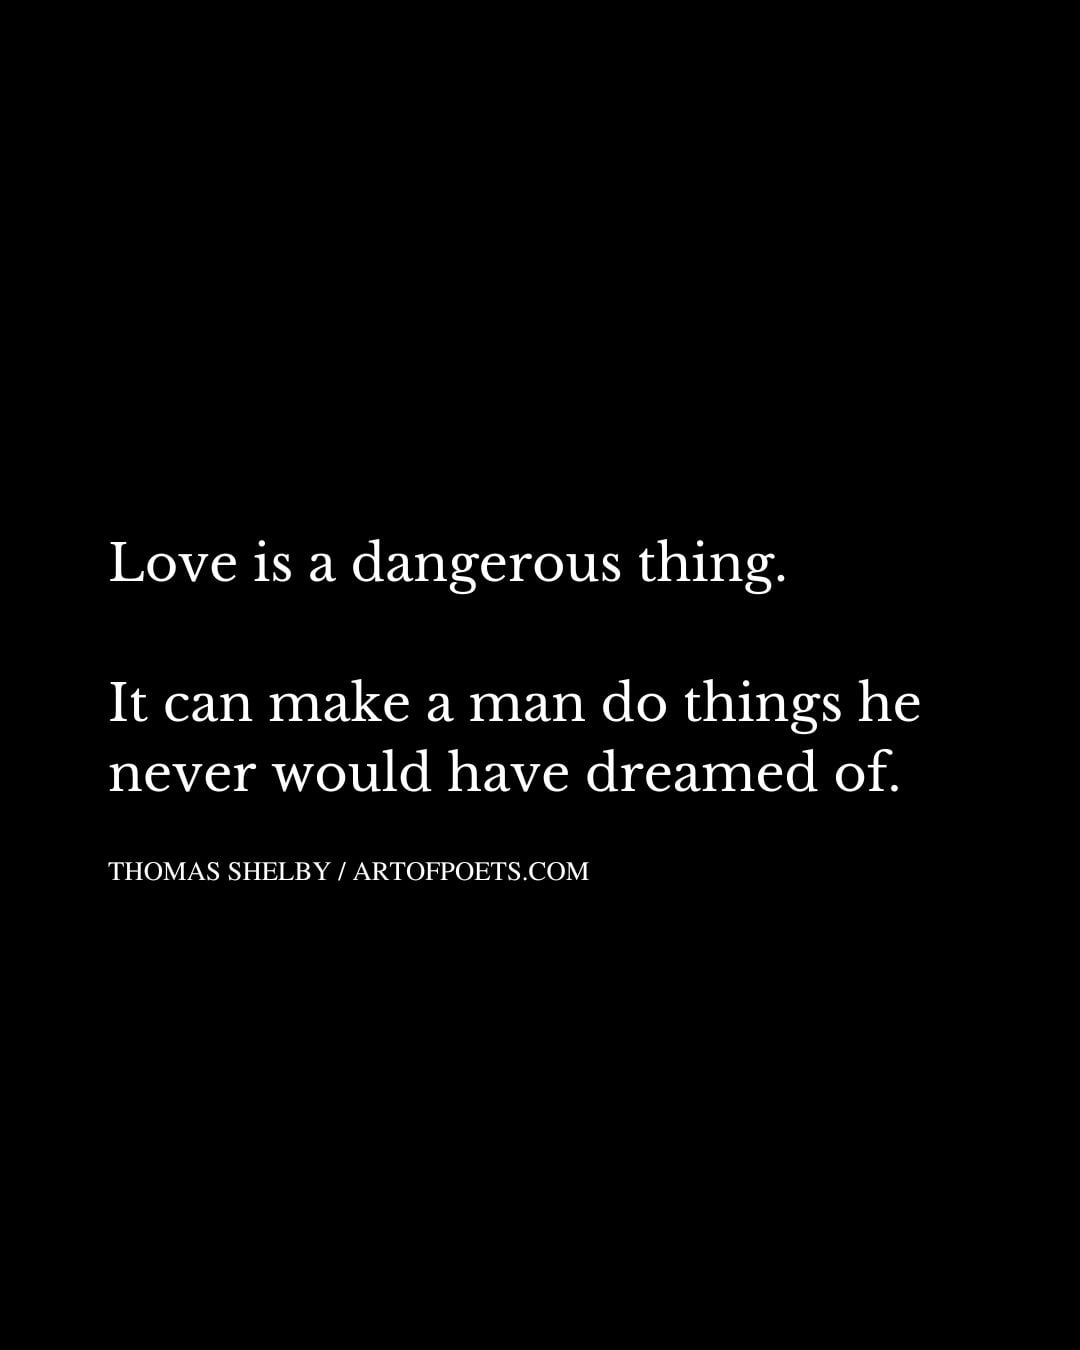 Love is a dangerous thing. It can make a man do things he never would have dreamed of